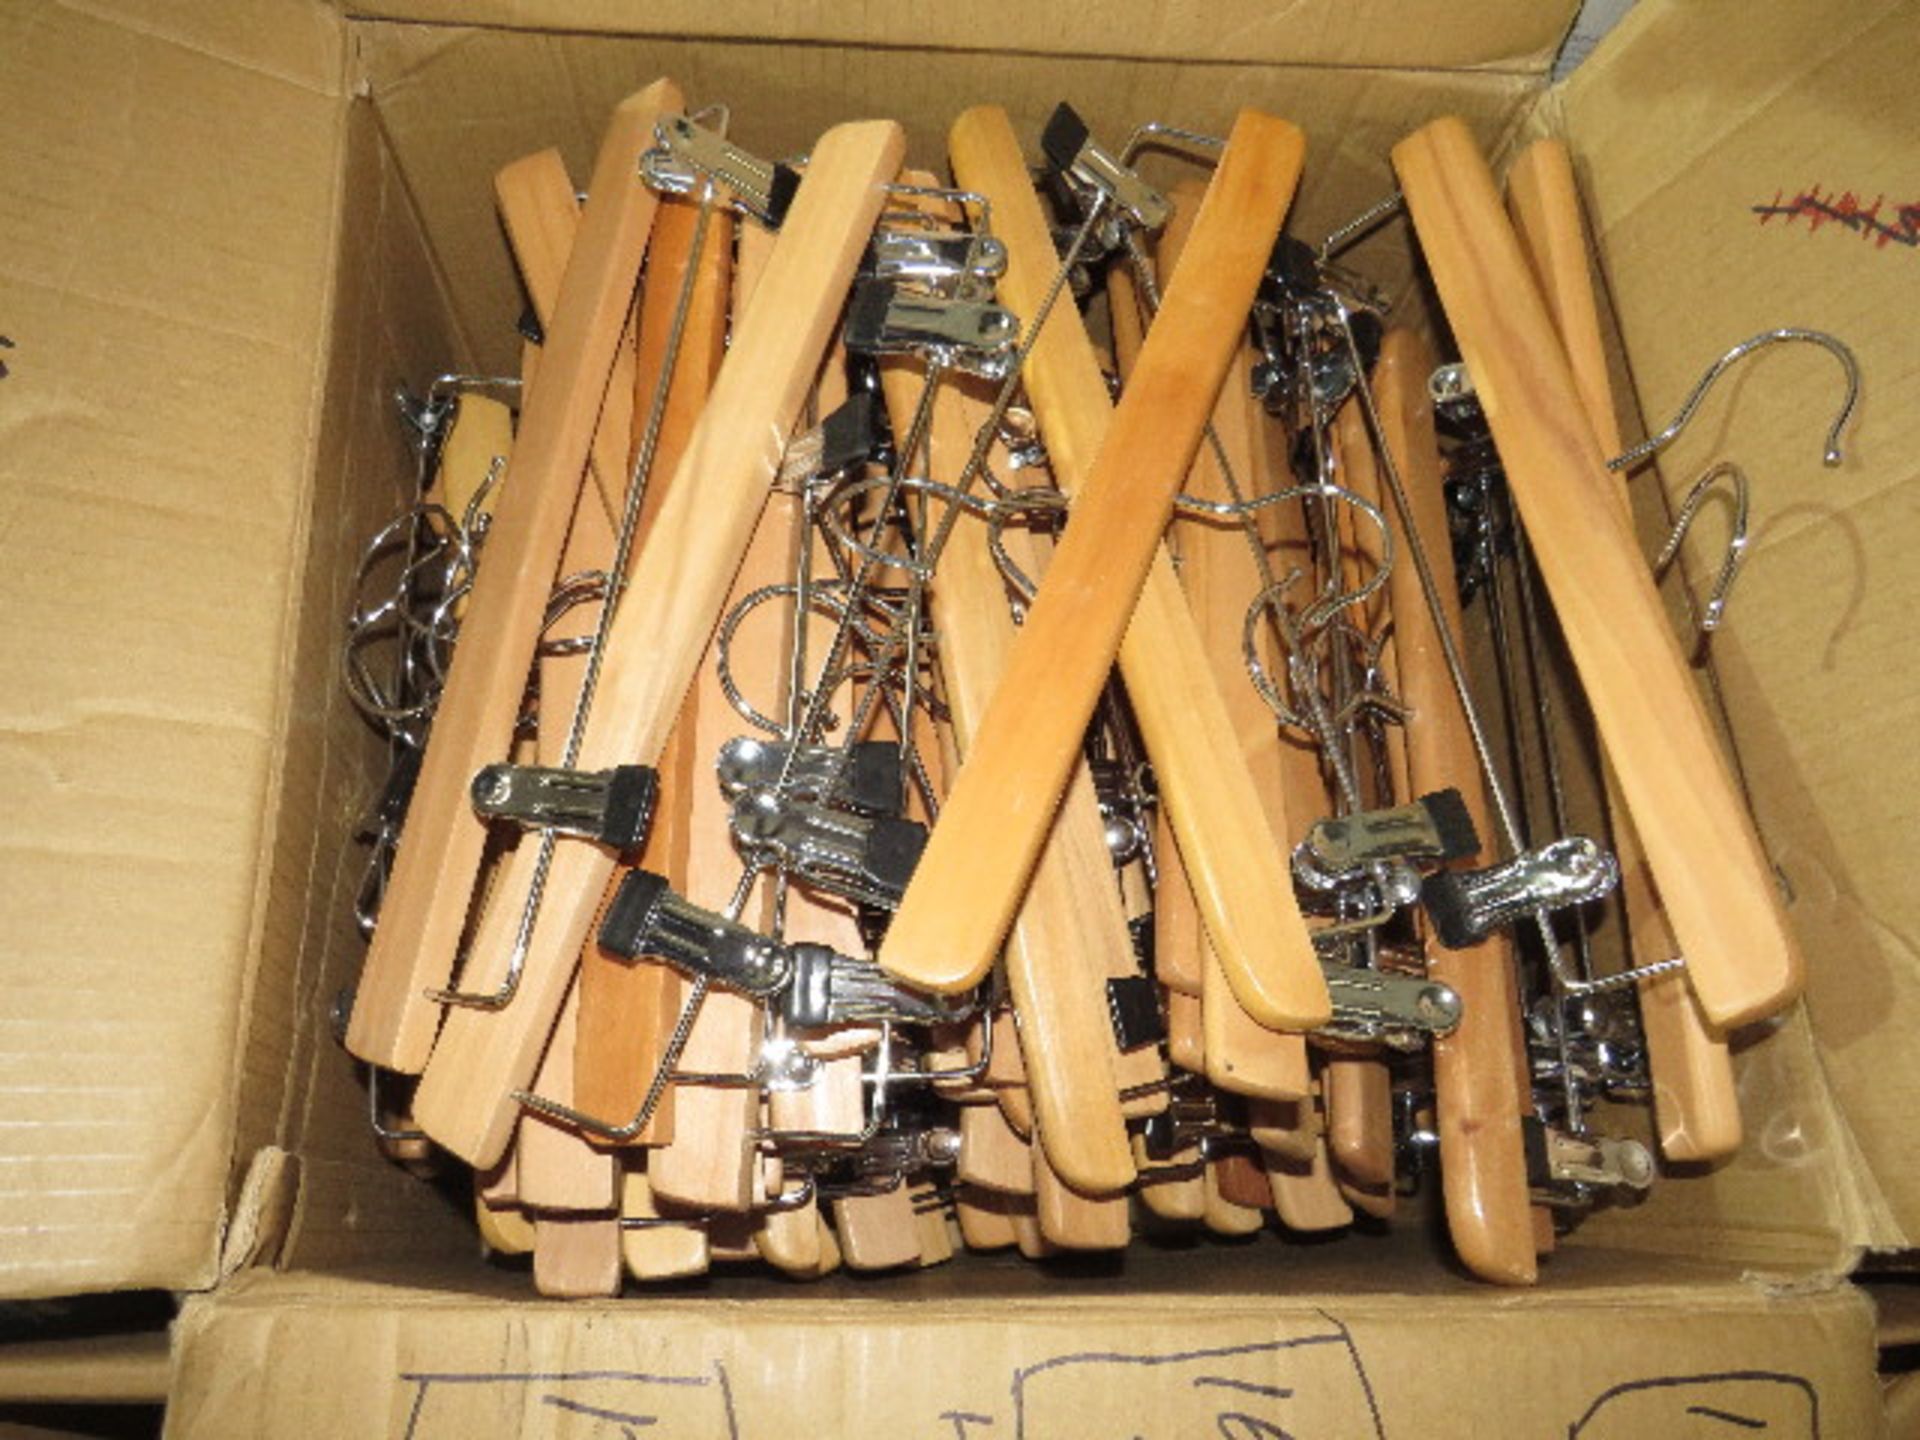 1x Box Containing Approx 100+ Wood & Metal Hangers - Good Condition.